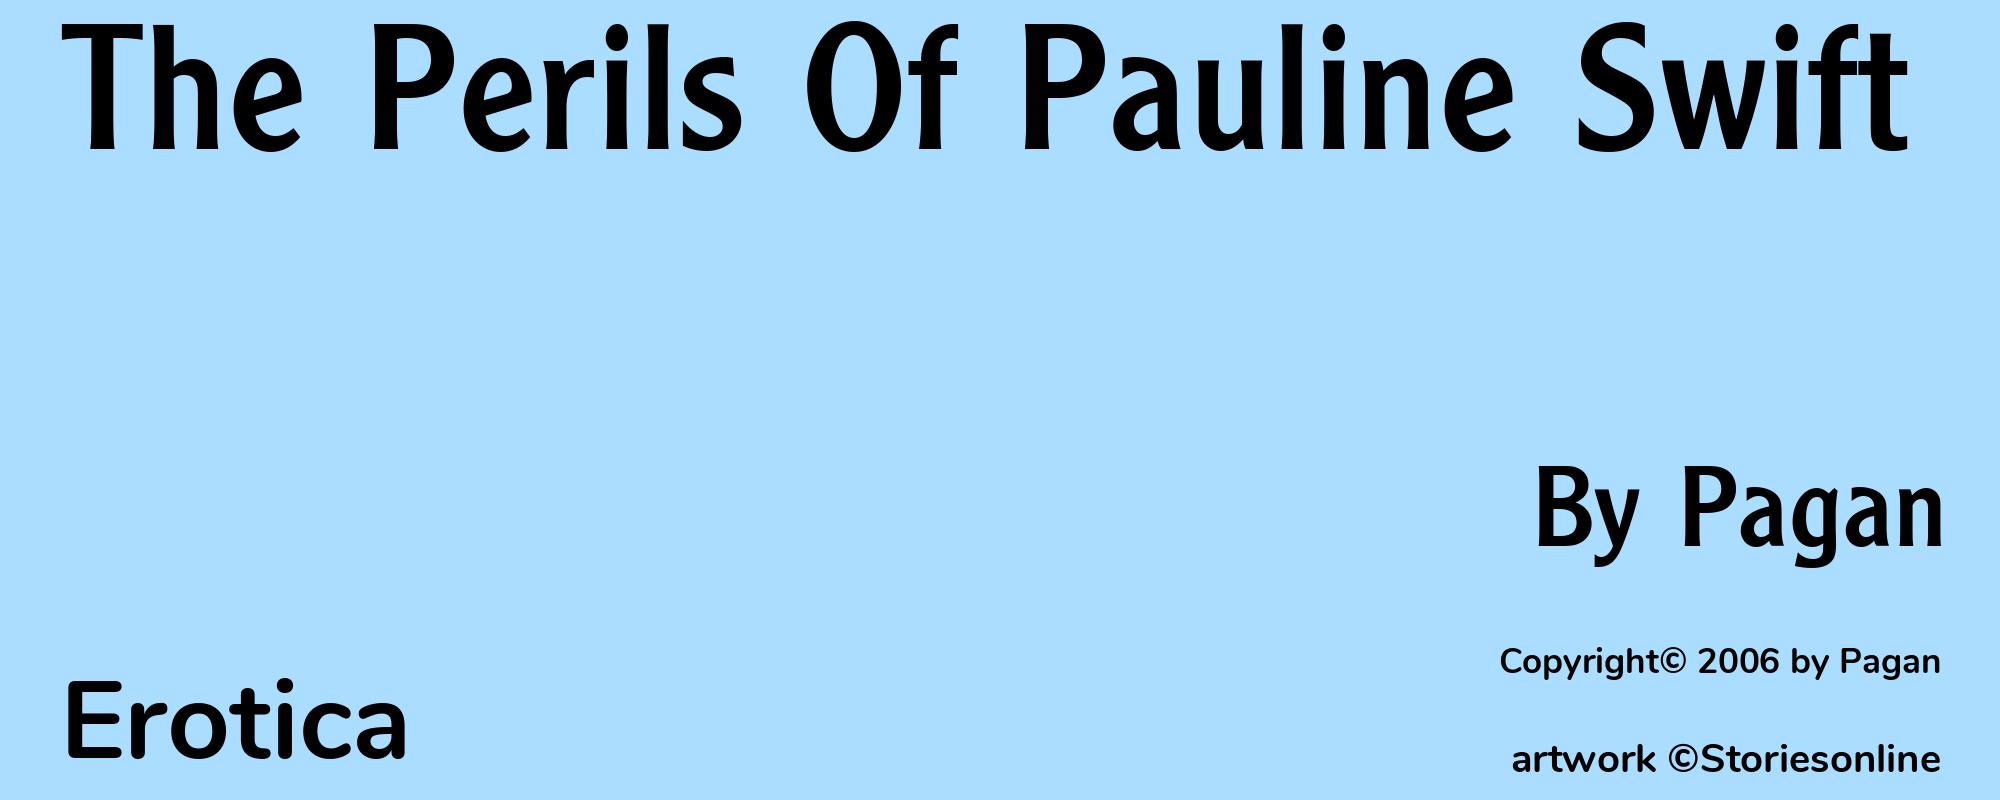 The Perils Of Pauline Swift - Cover